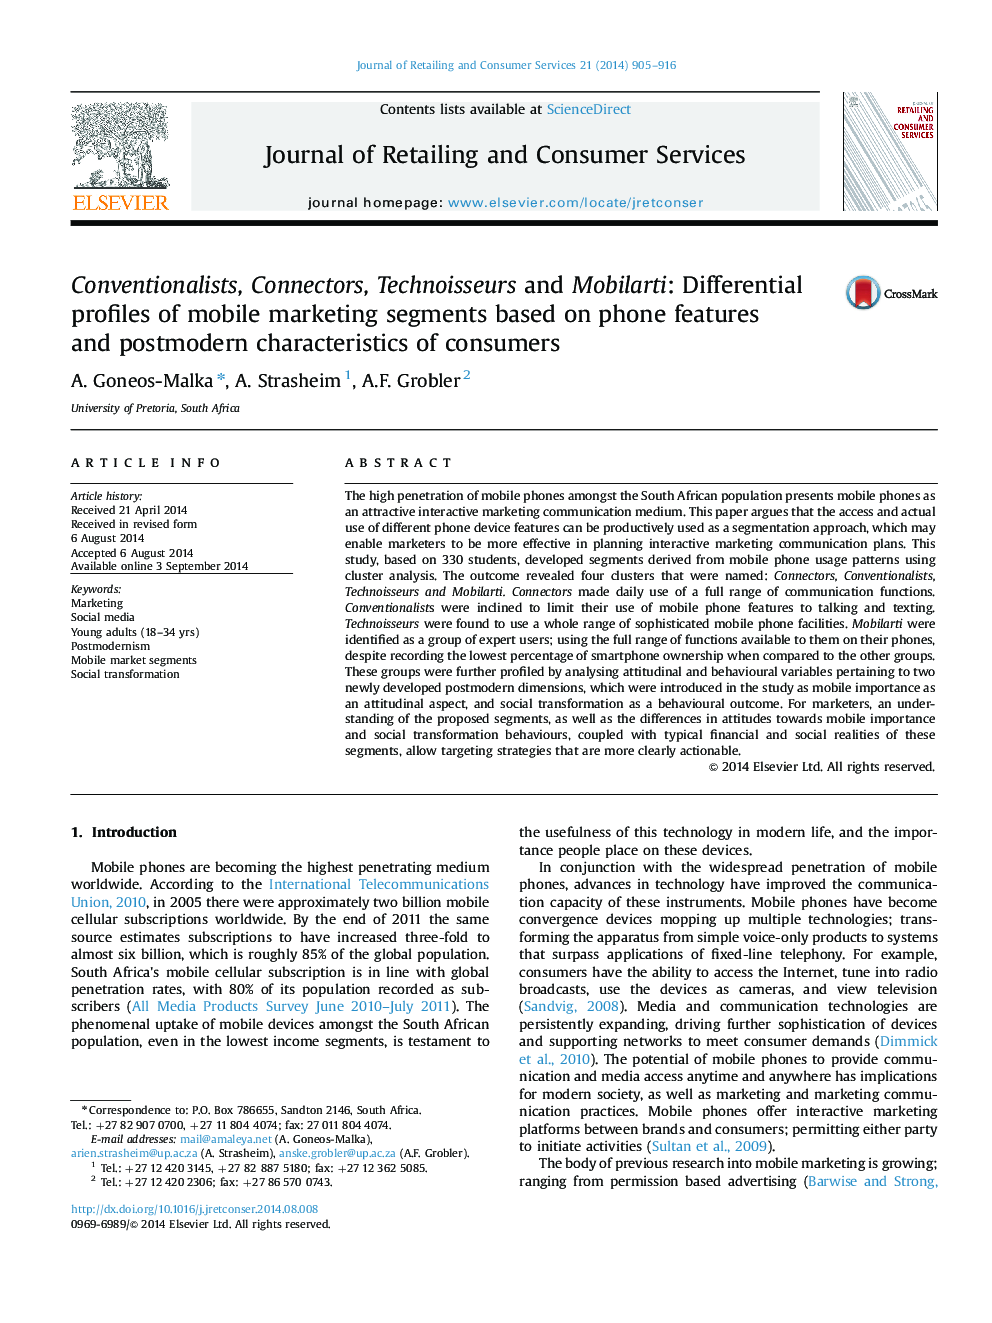 Conventionalists, Connectors, Technoisseurs and Mobilarti: Differential profiles of mobile marketing segments based on phone features and postmodern characteristics of consumers